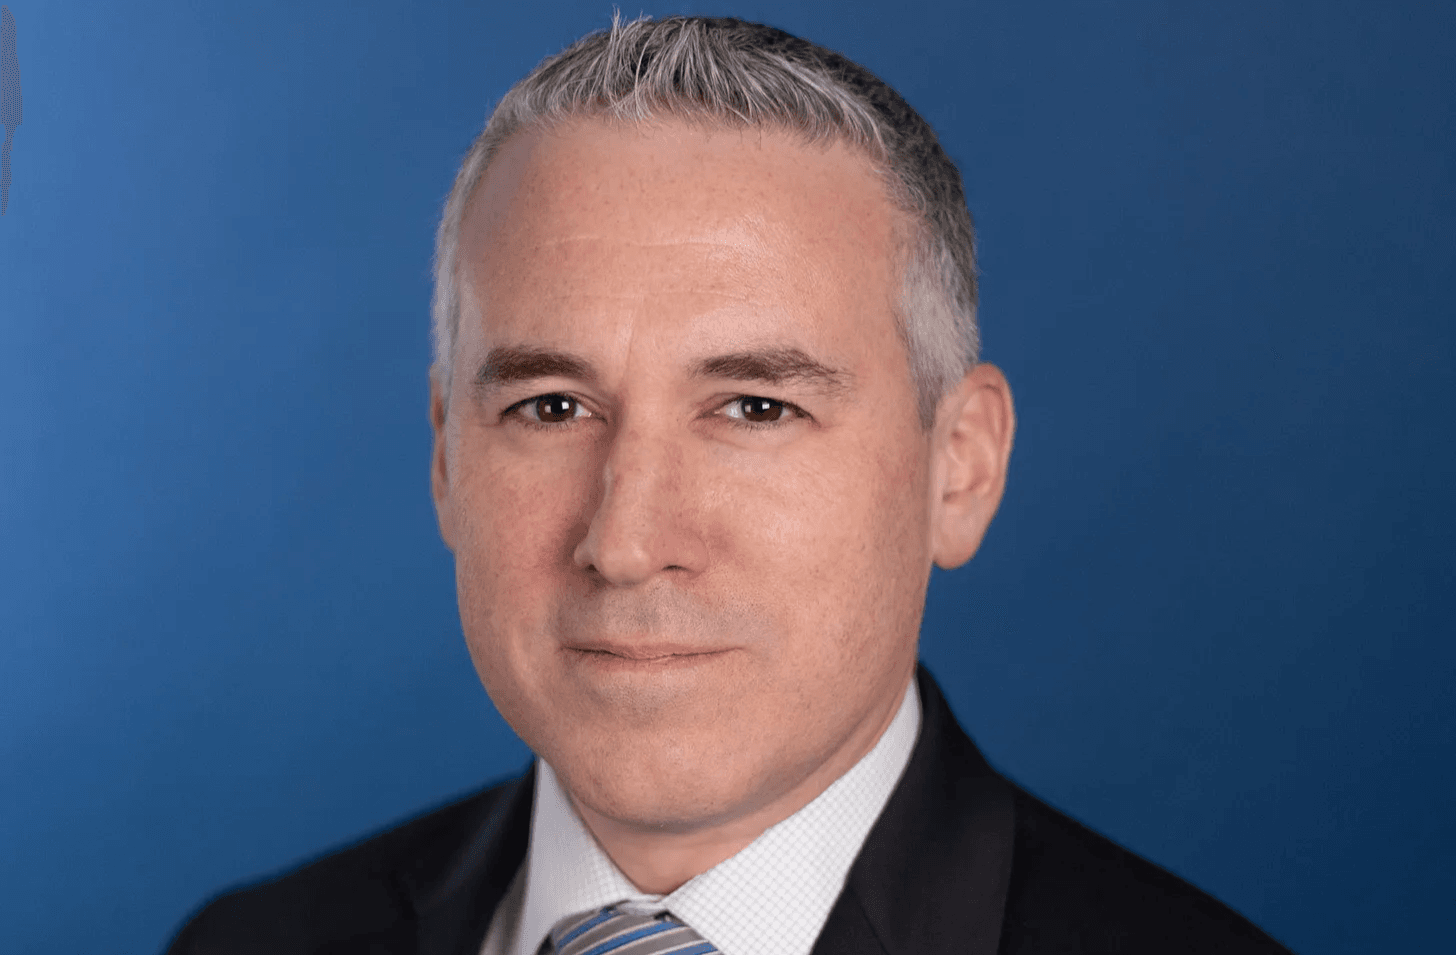 Our community to host Middle East expert Dr. Jonathan Schanzer